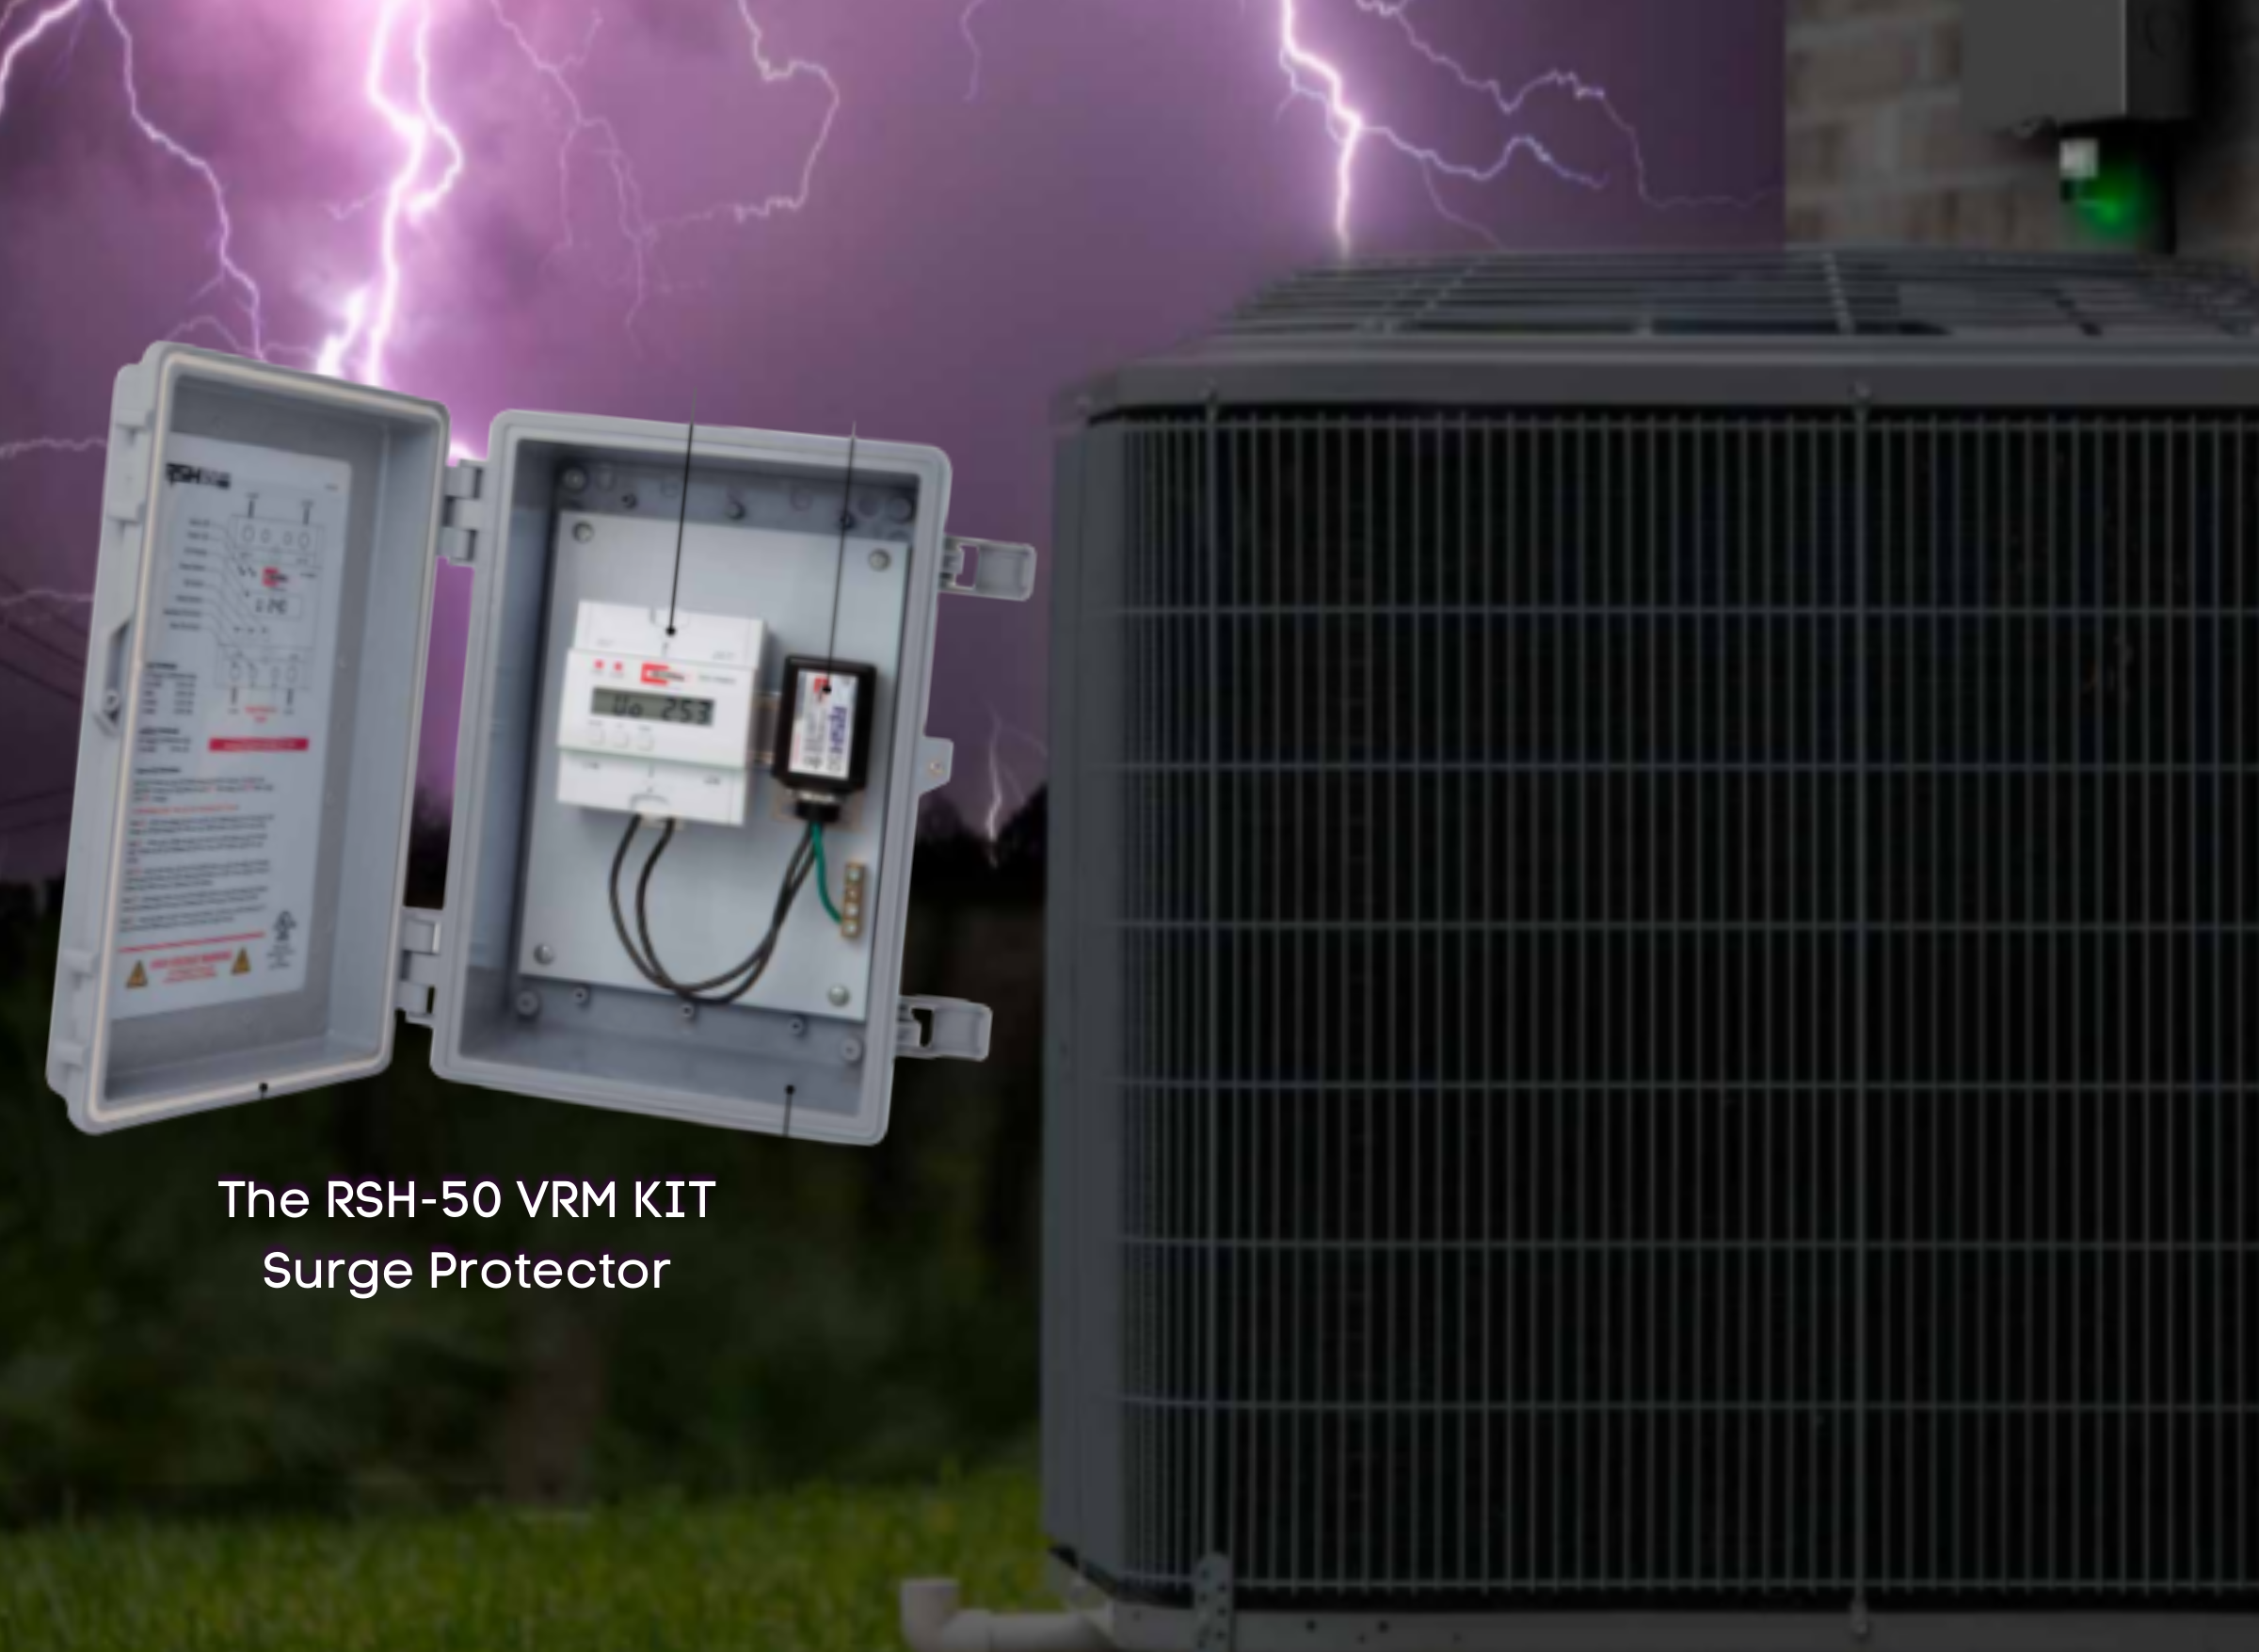 The RSH-50 VRM KIT Surge Protector alongside an outdoor AC unit during a storm.